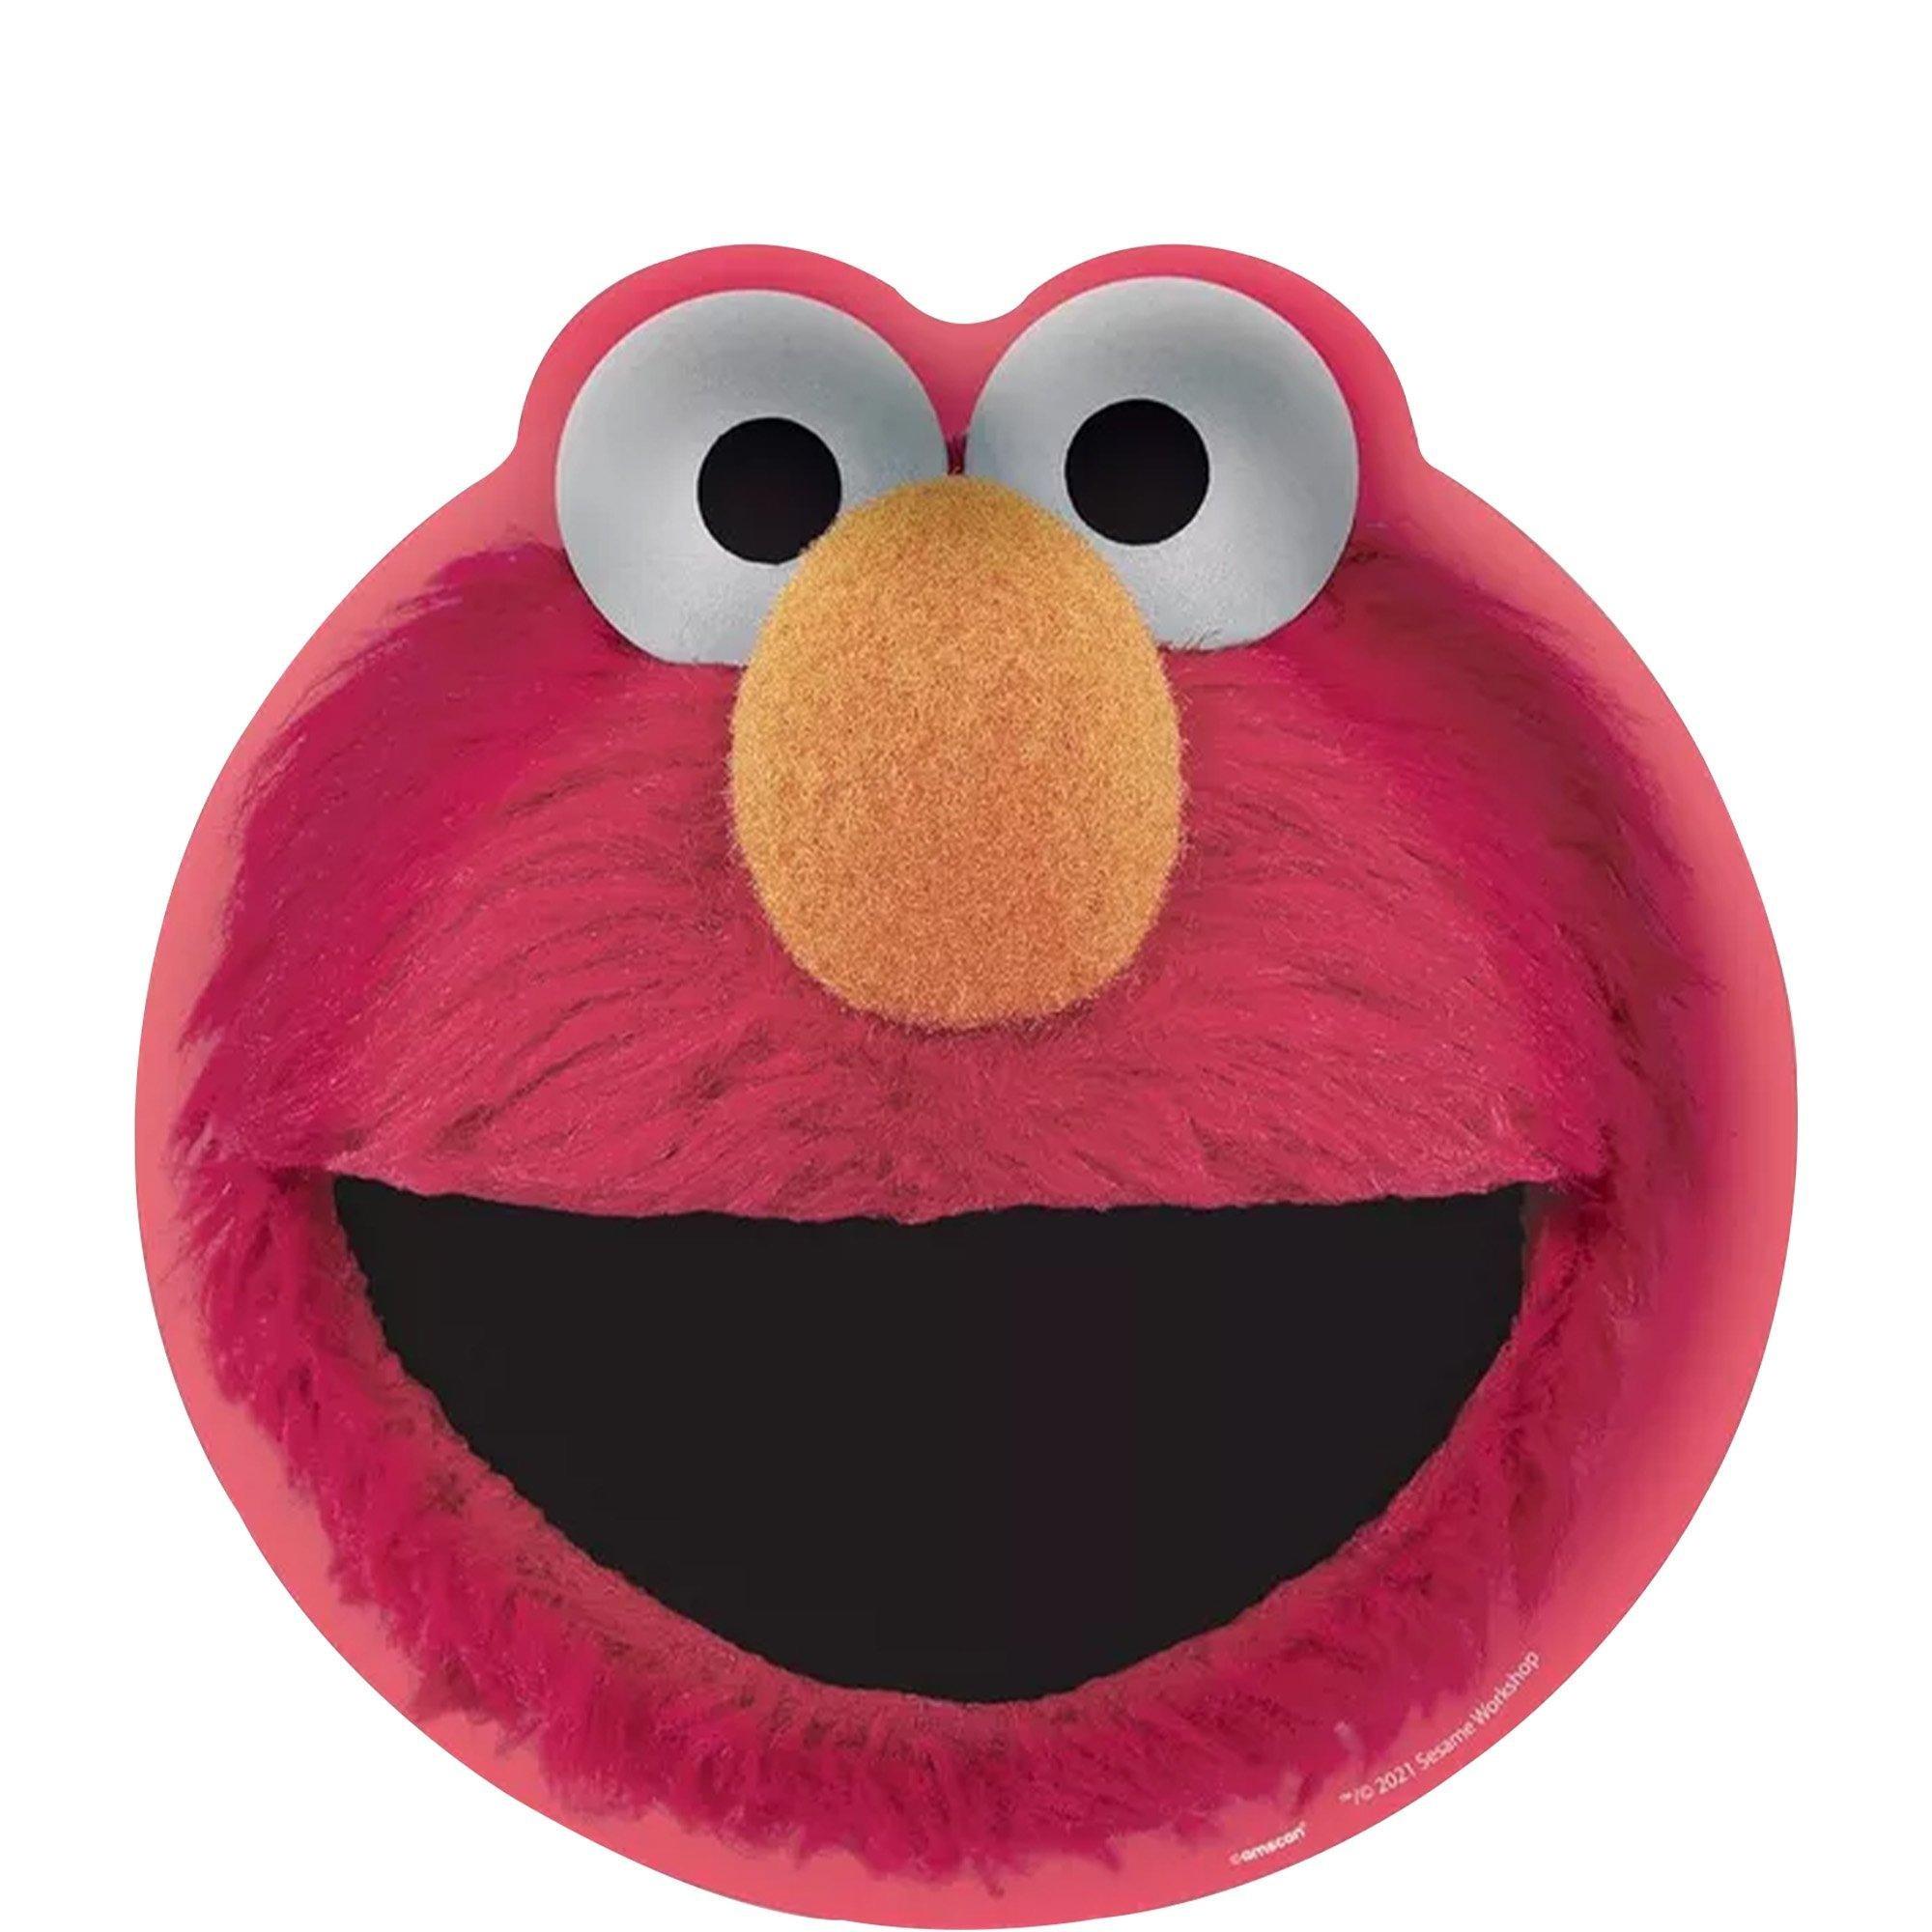 Sesame Street Birthday Party Kit for 8 - Plates, Napkins, Cups & Candles